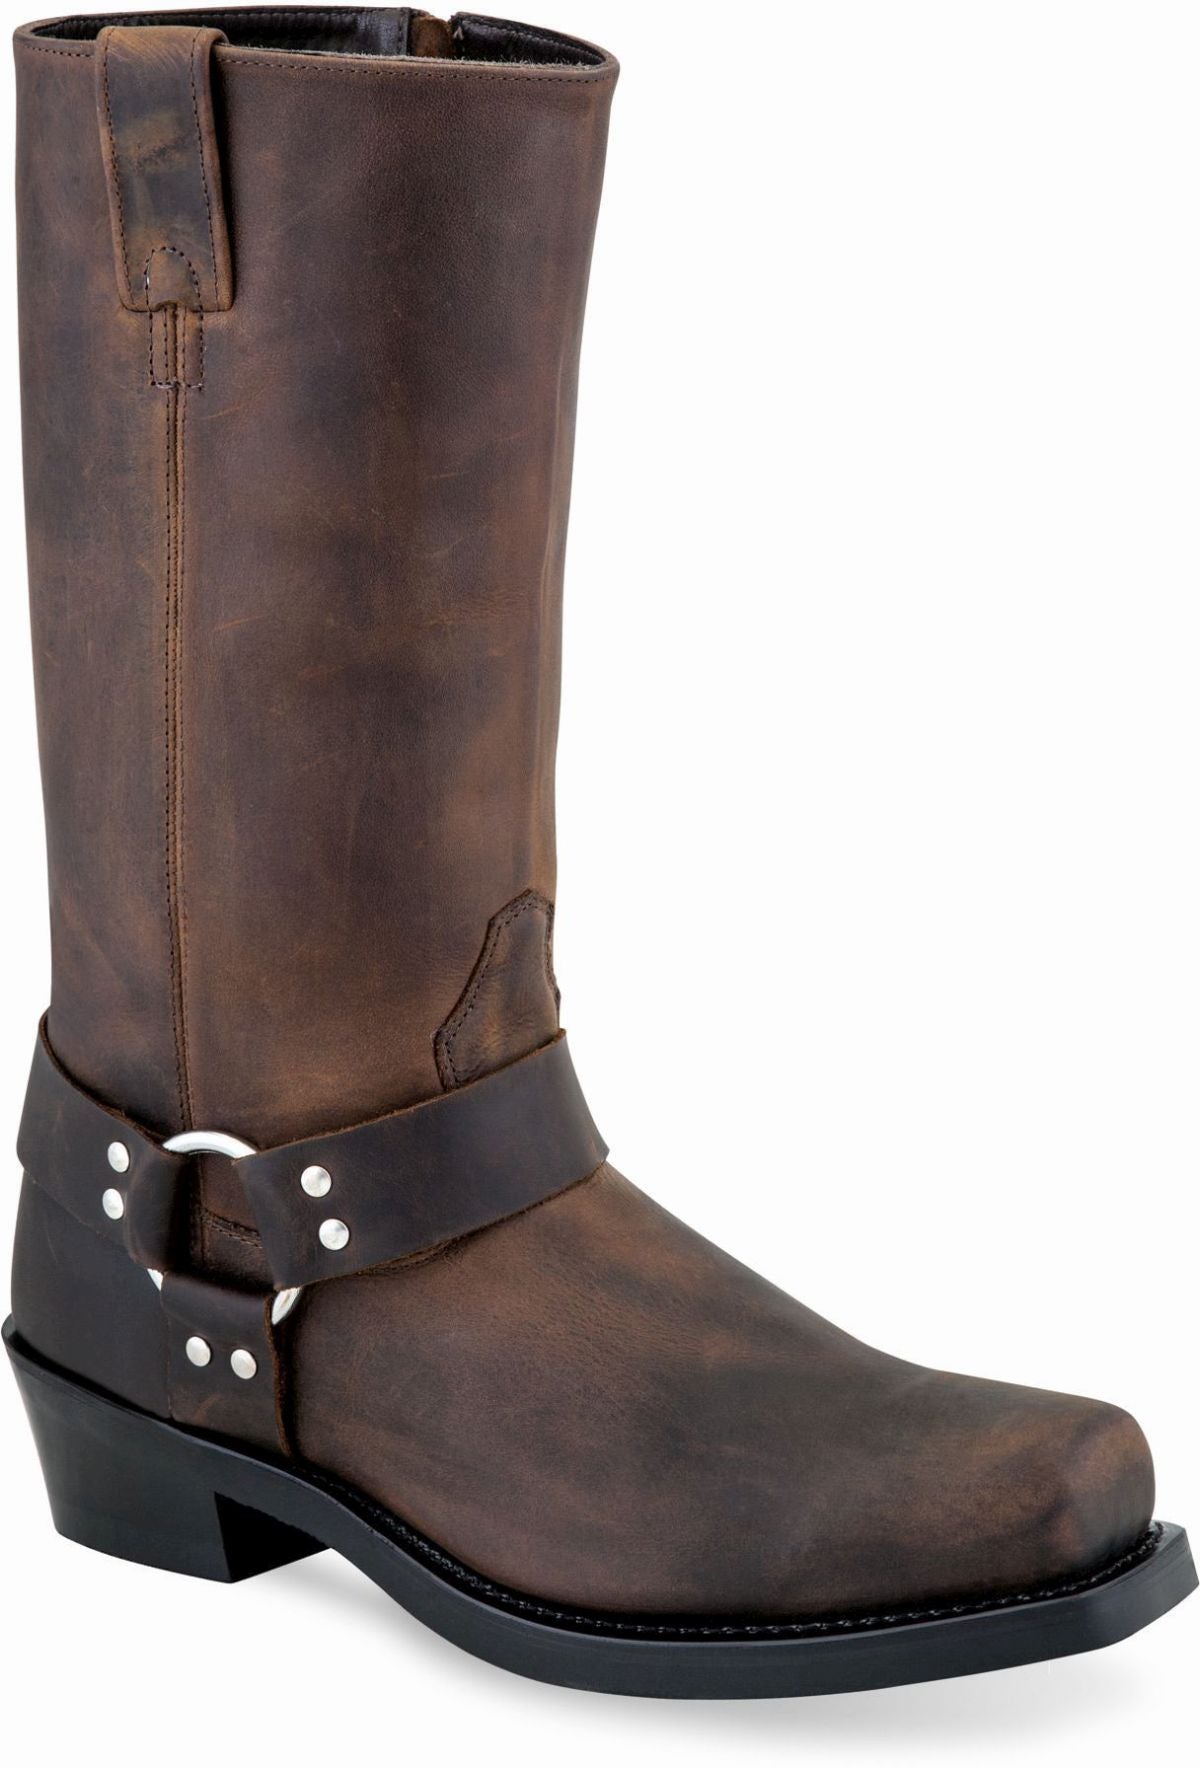 Old West Brown Men's Square Toe Harness Boots